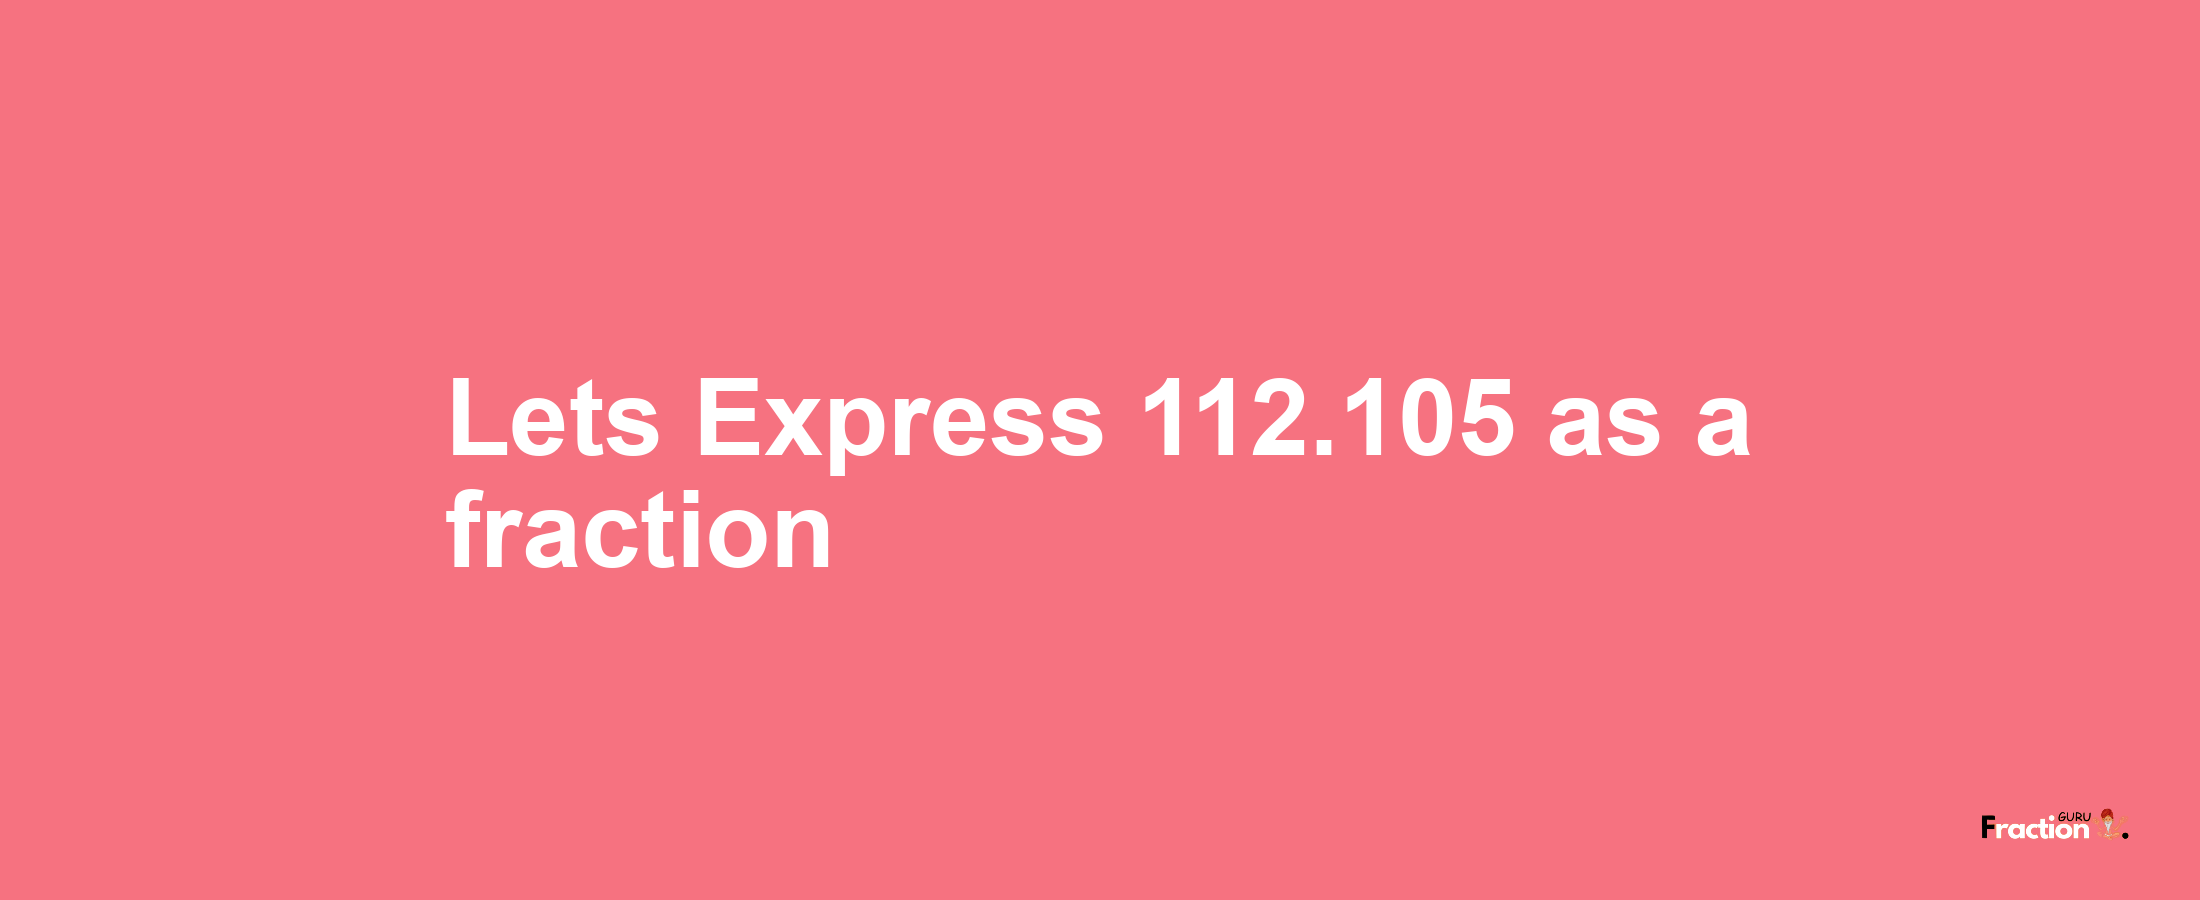 Lets Express 112.105 as afraction